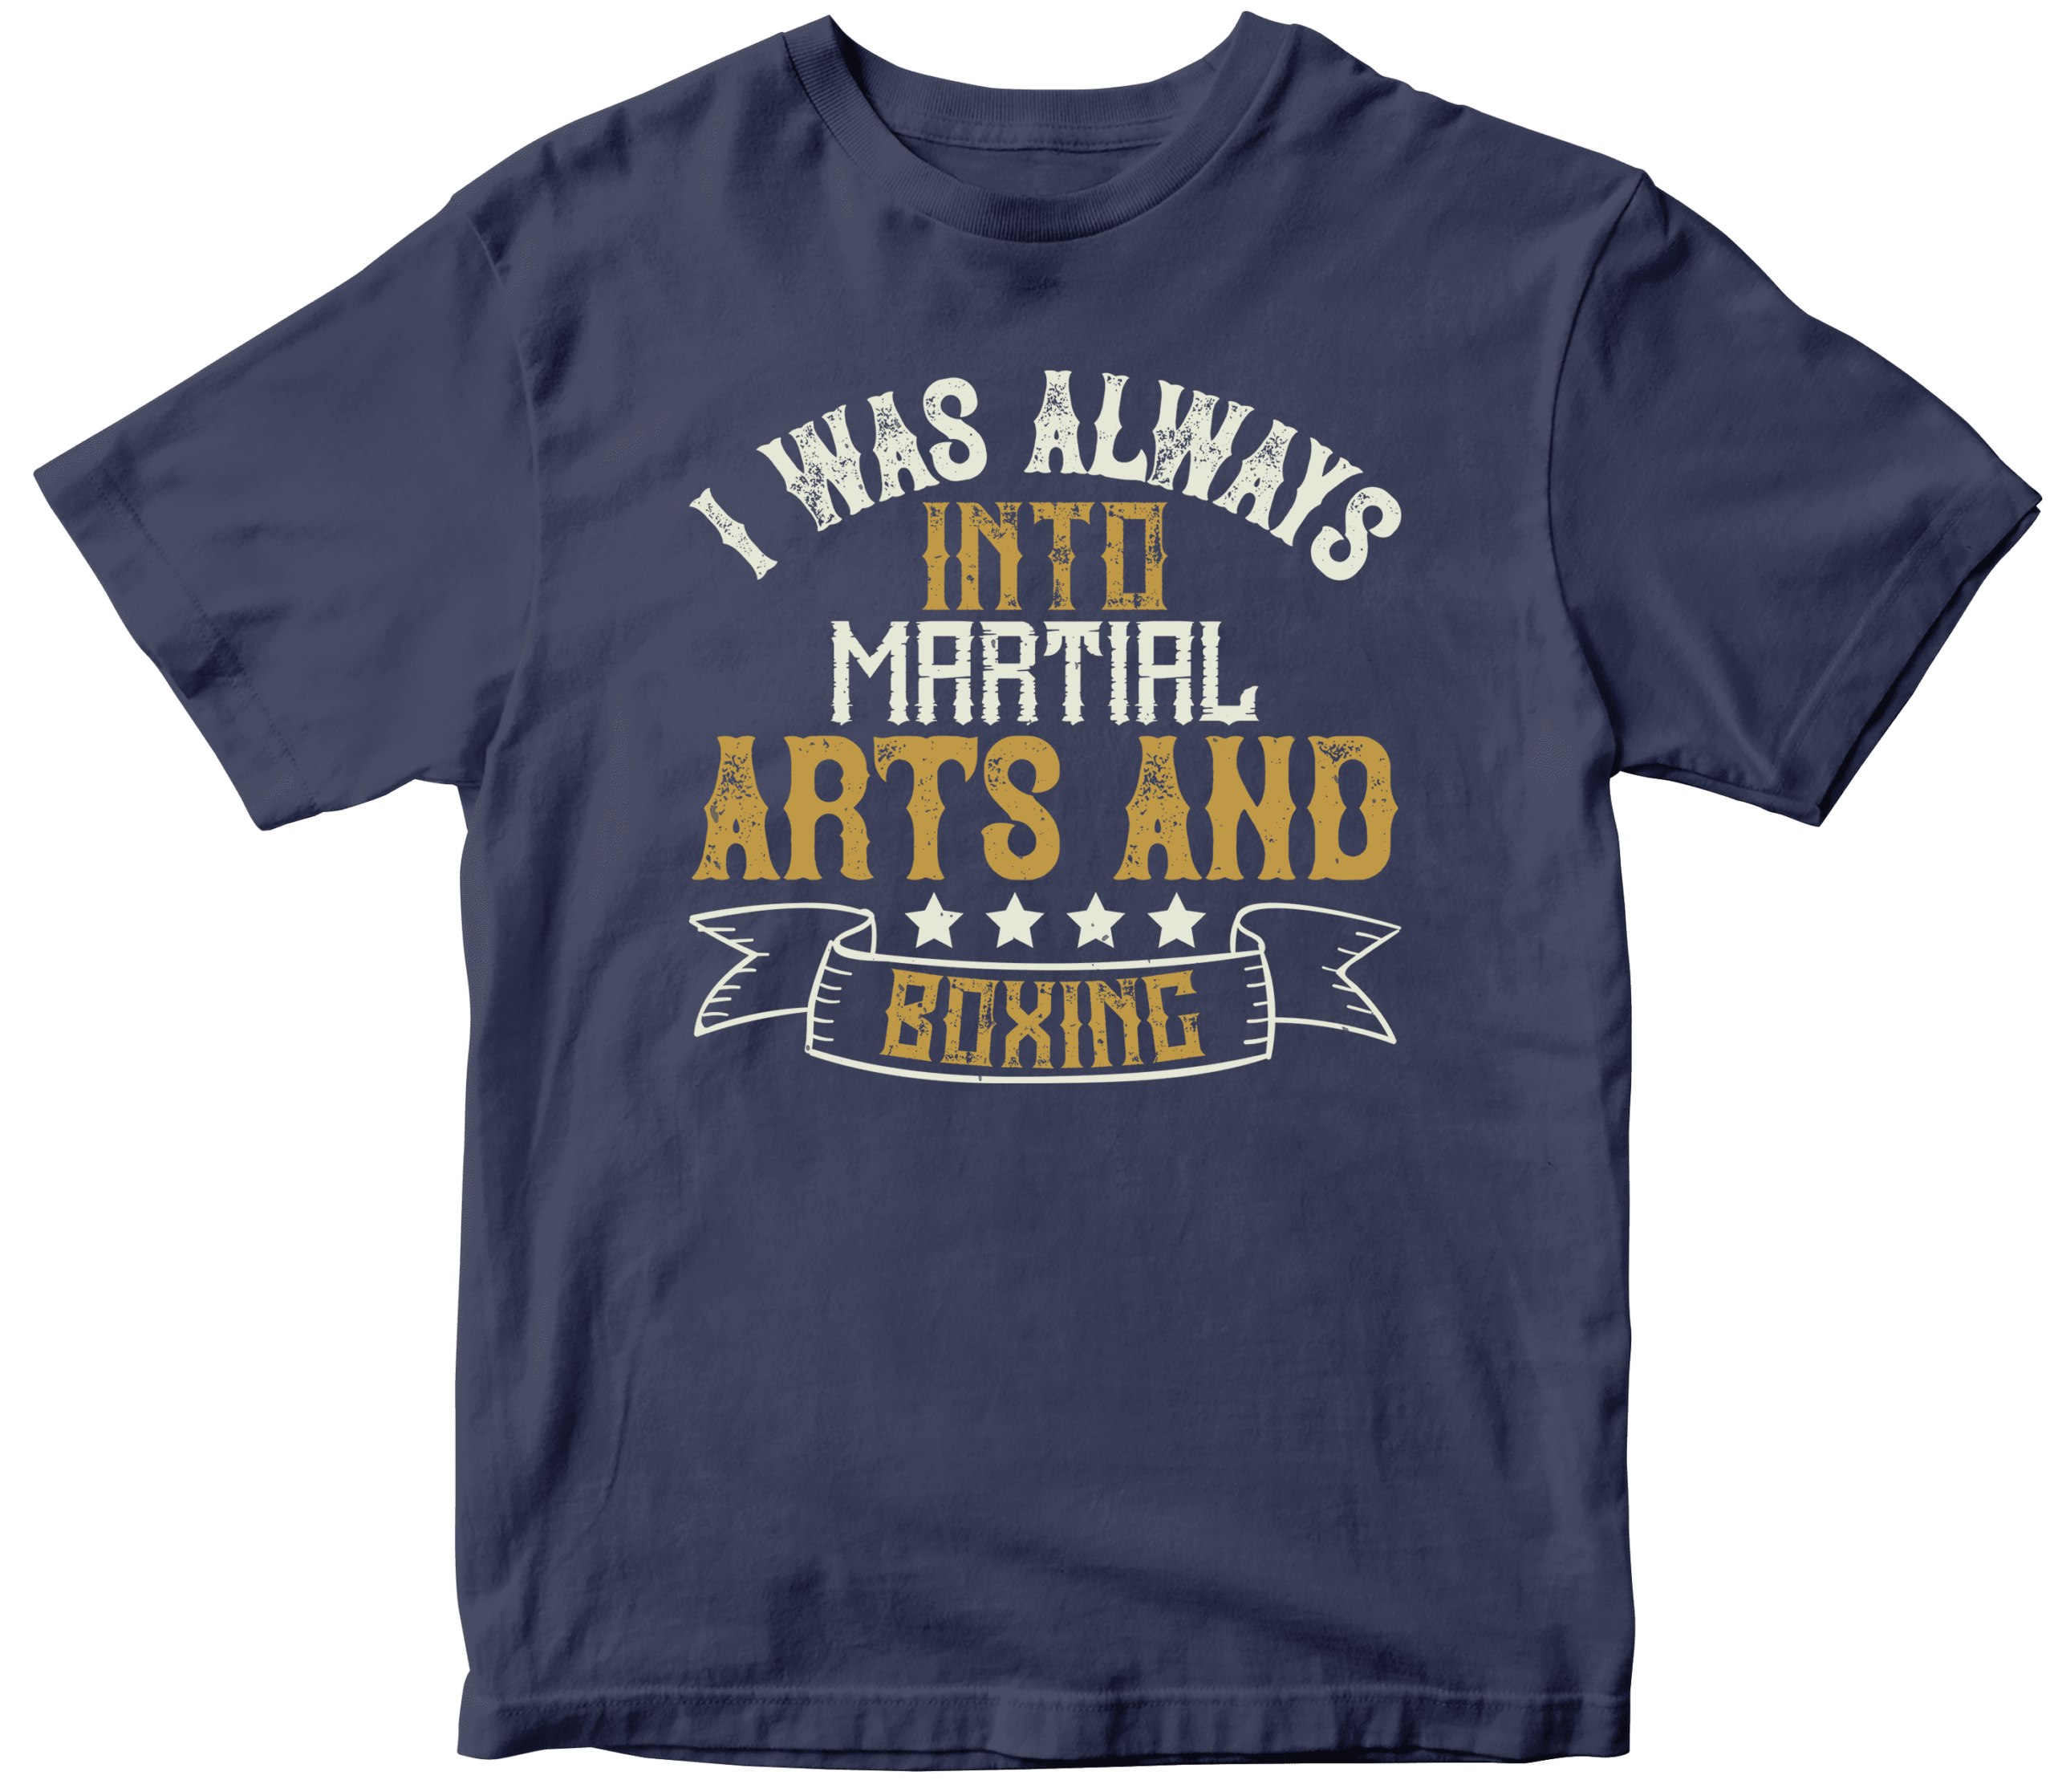 I was always into martial arts and boxing